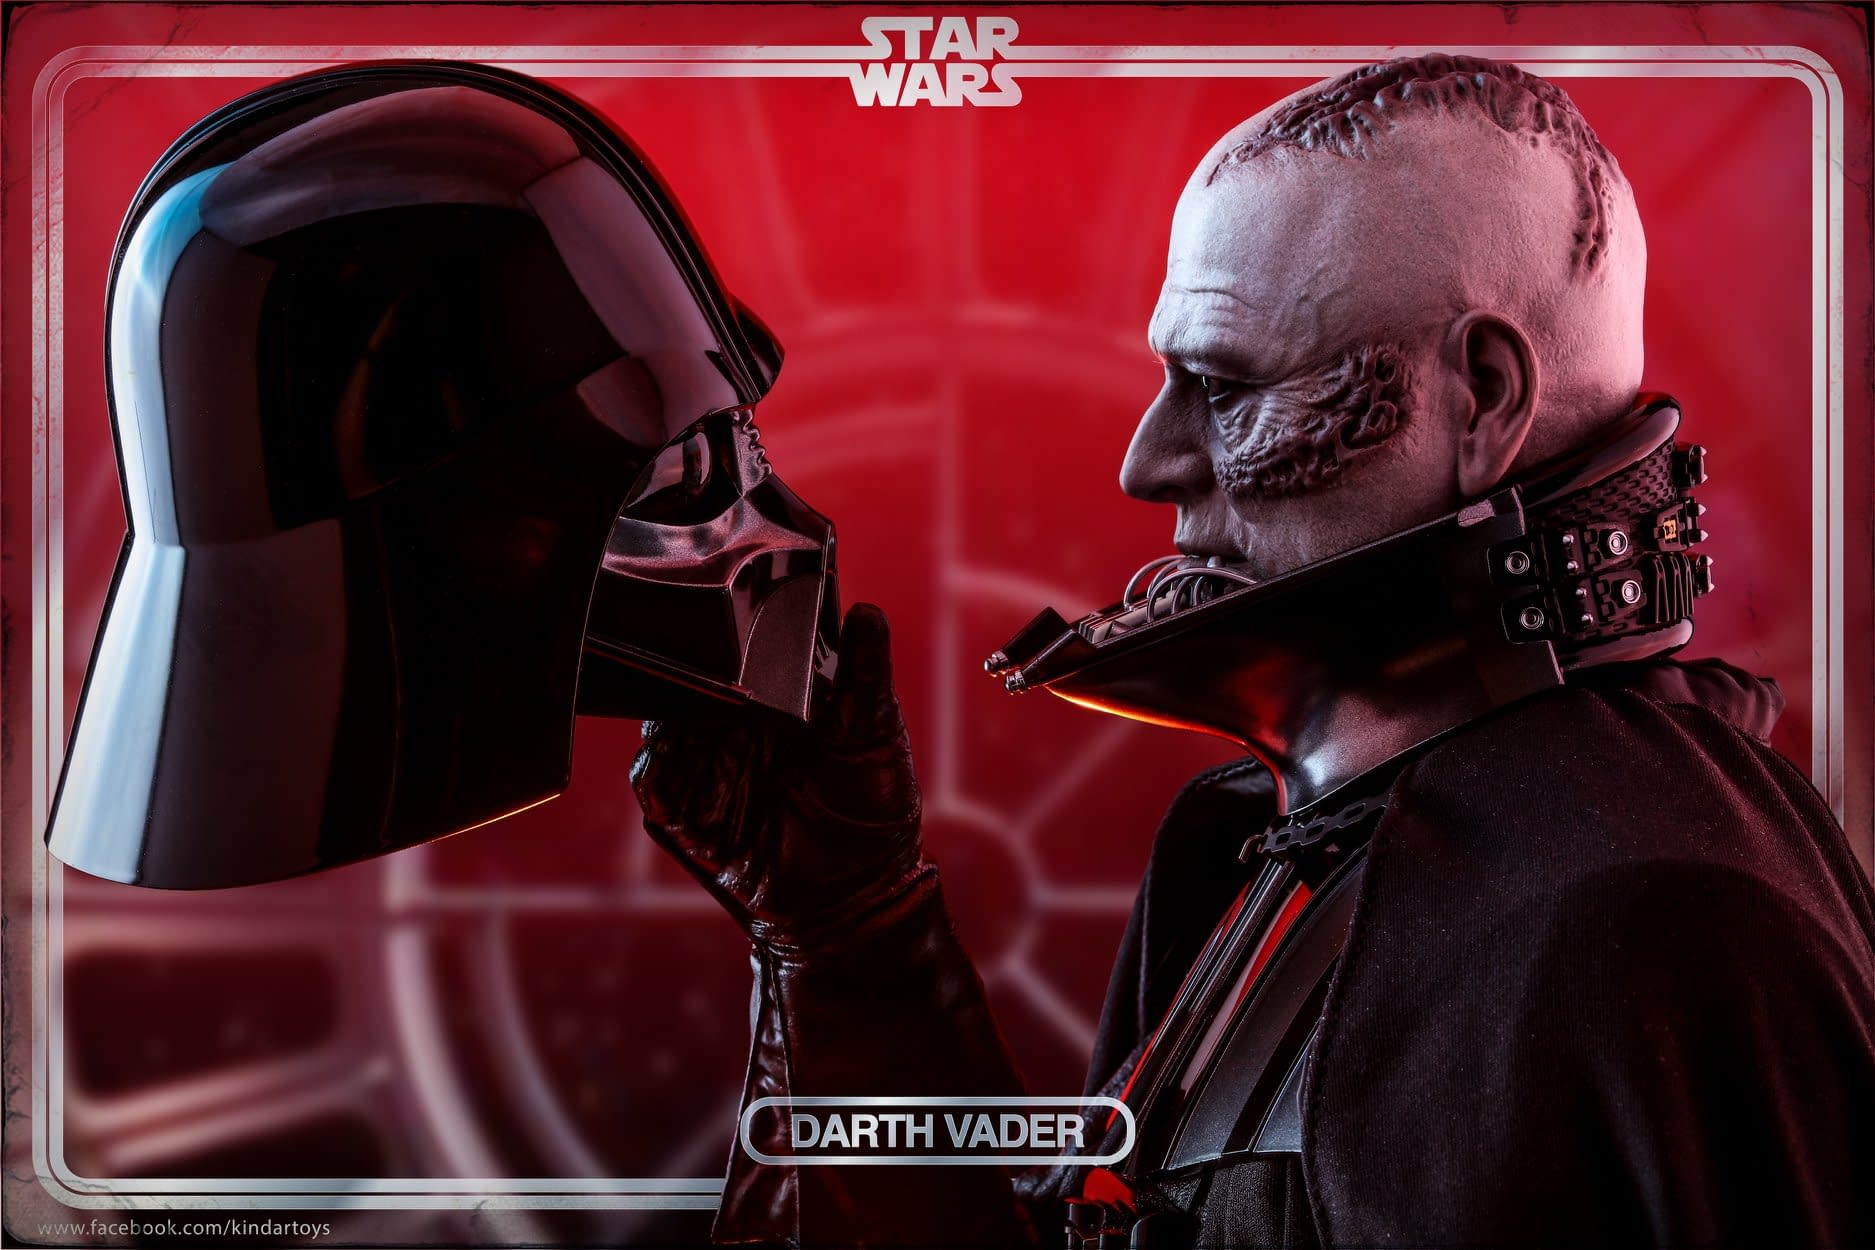 Darth Vader Shows the Wrath of the Empire in Hot Toys Preview